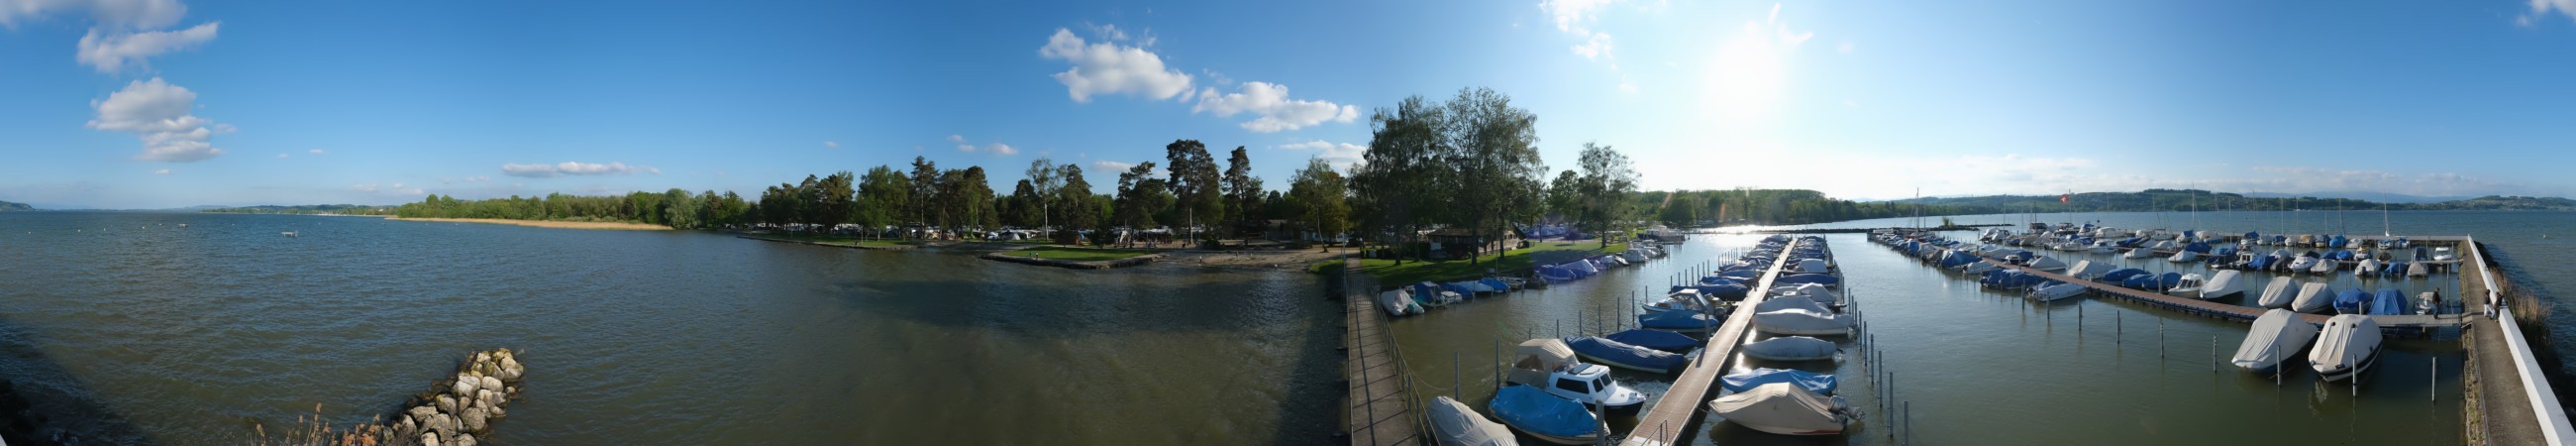 Webcam Avenches Camping Port Plage